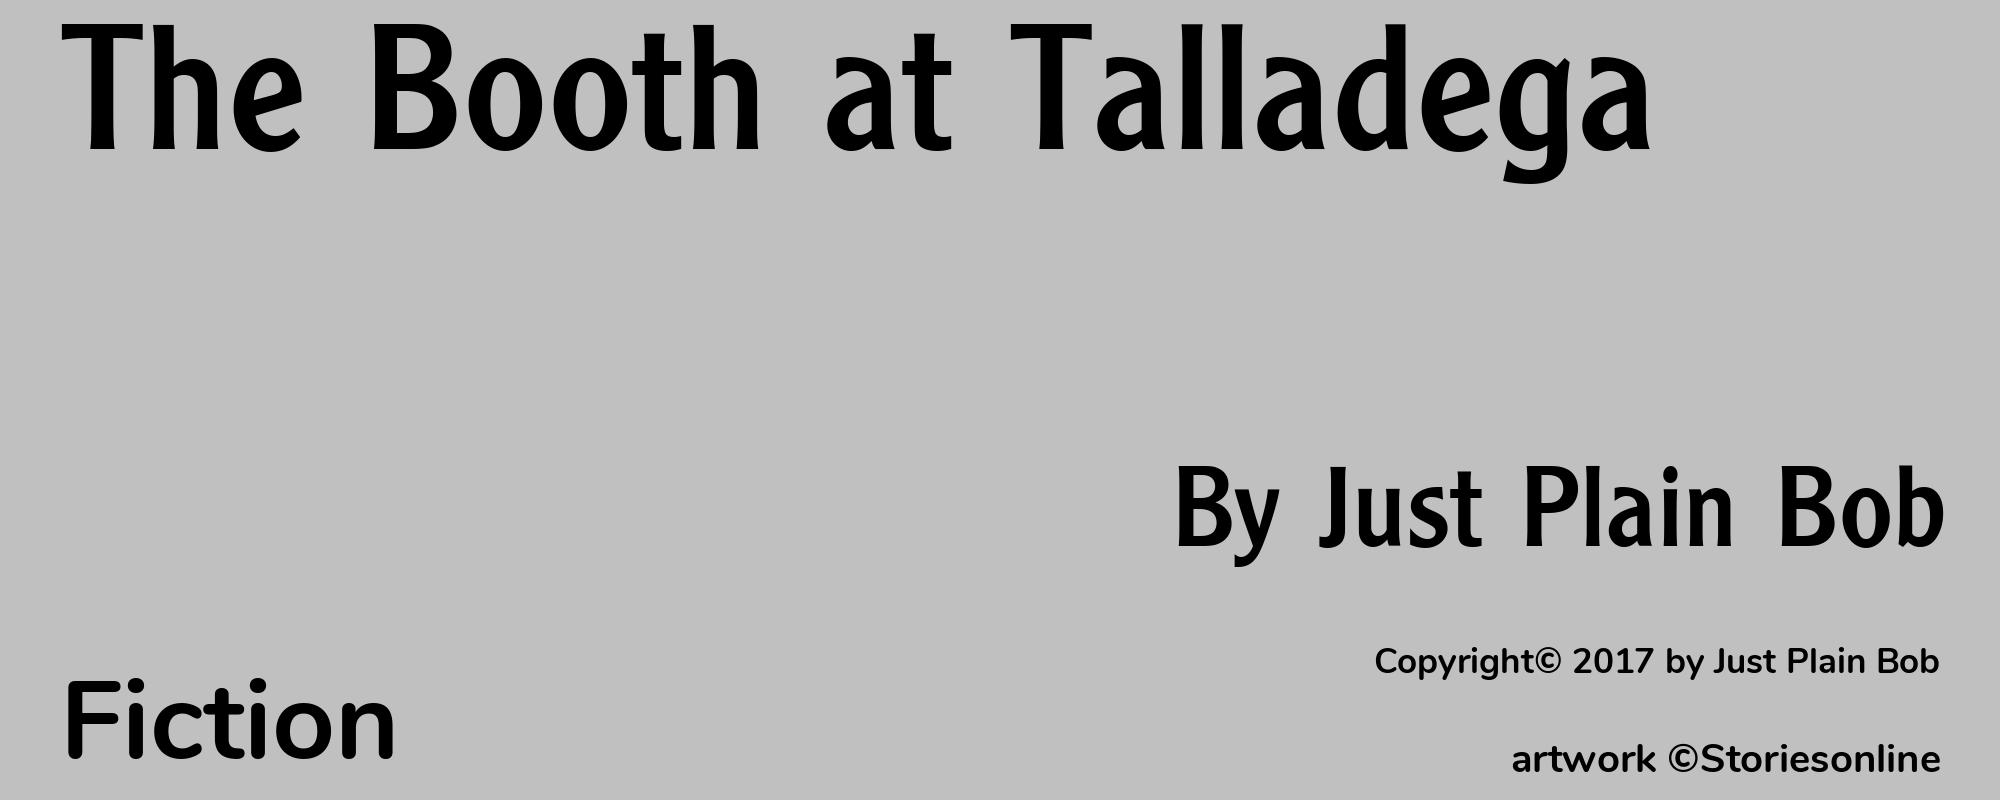 The Booth at Talladega - Cover